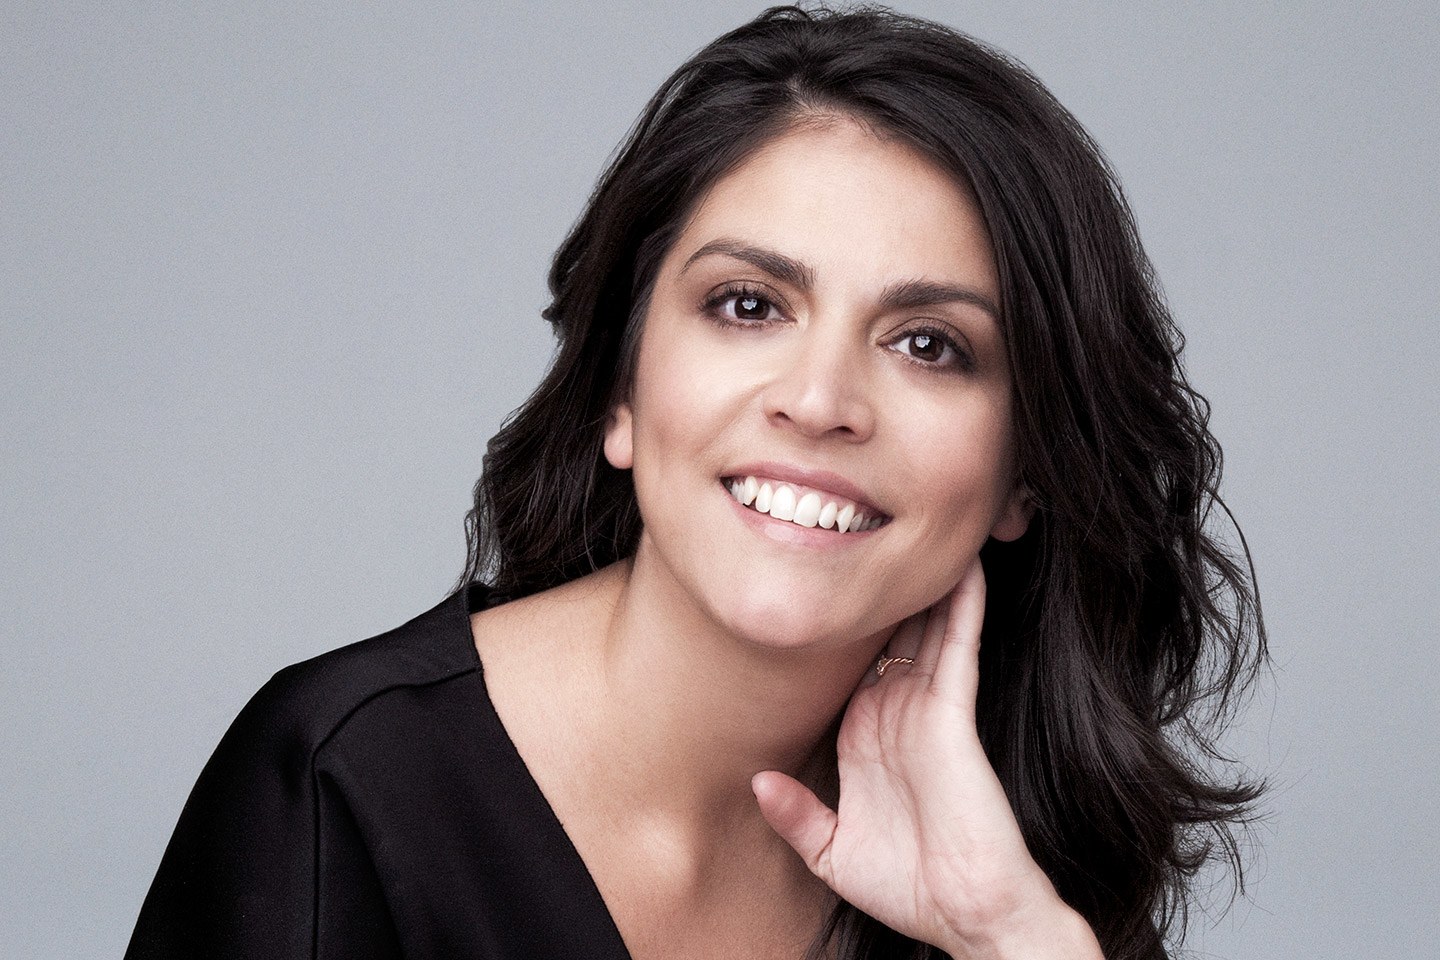 Cecily strong was born to parents penelope strong and bill strong. 